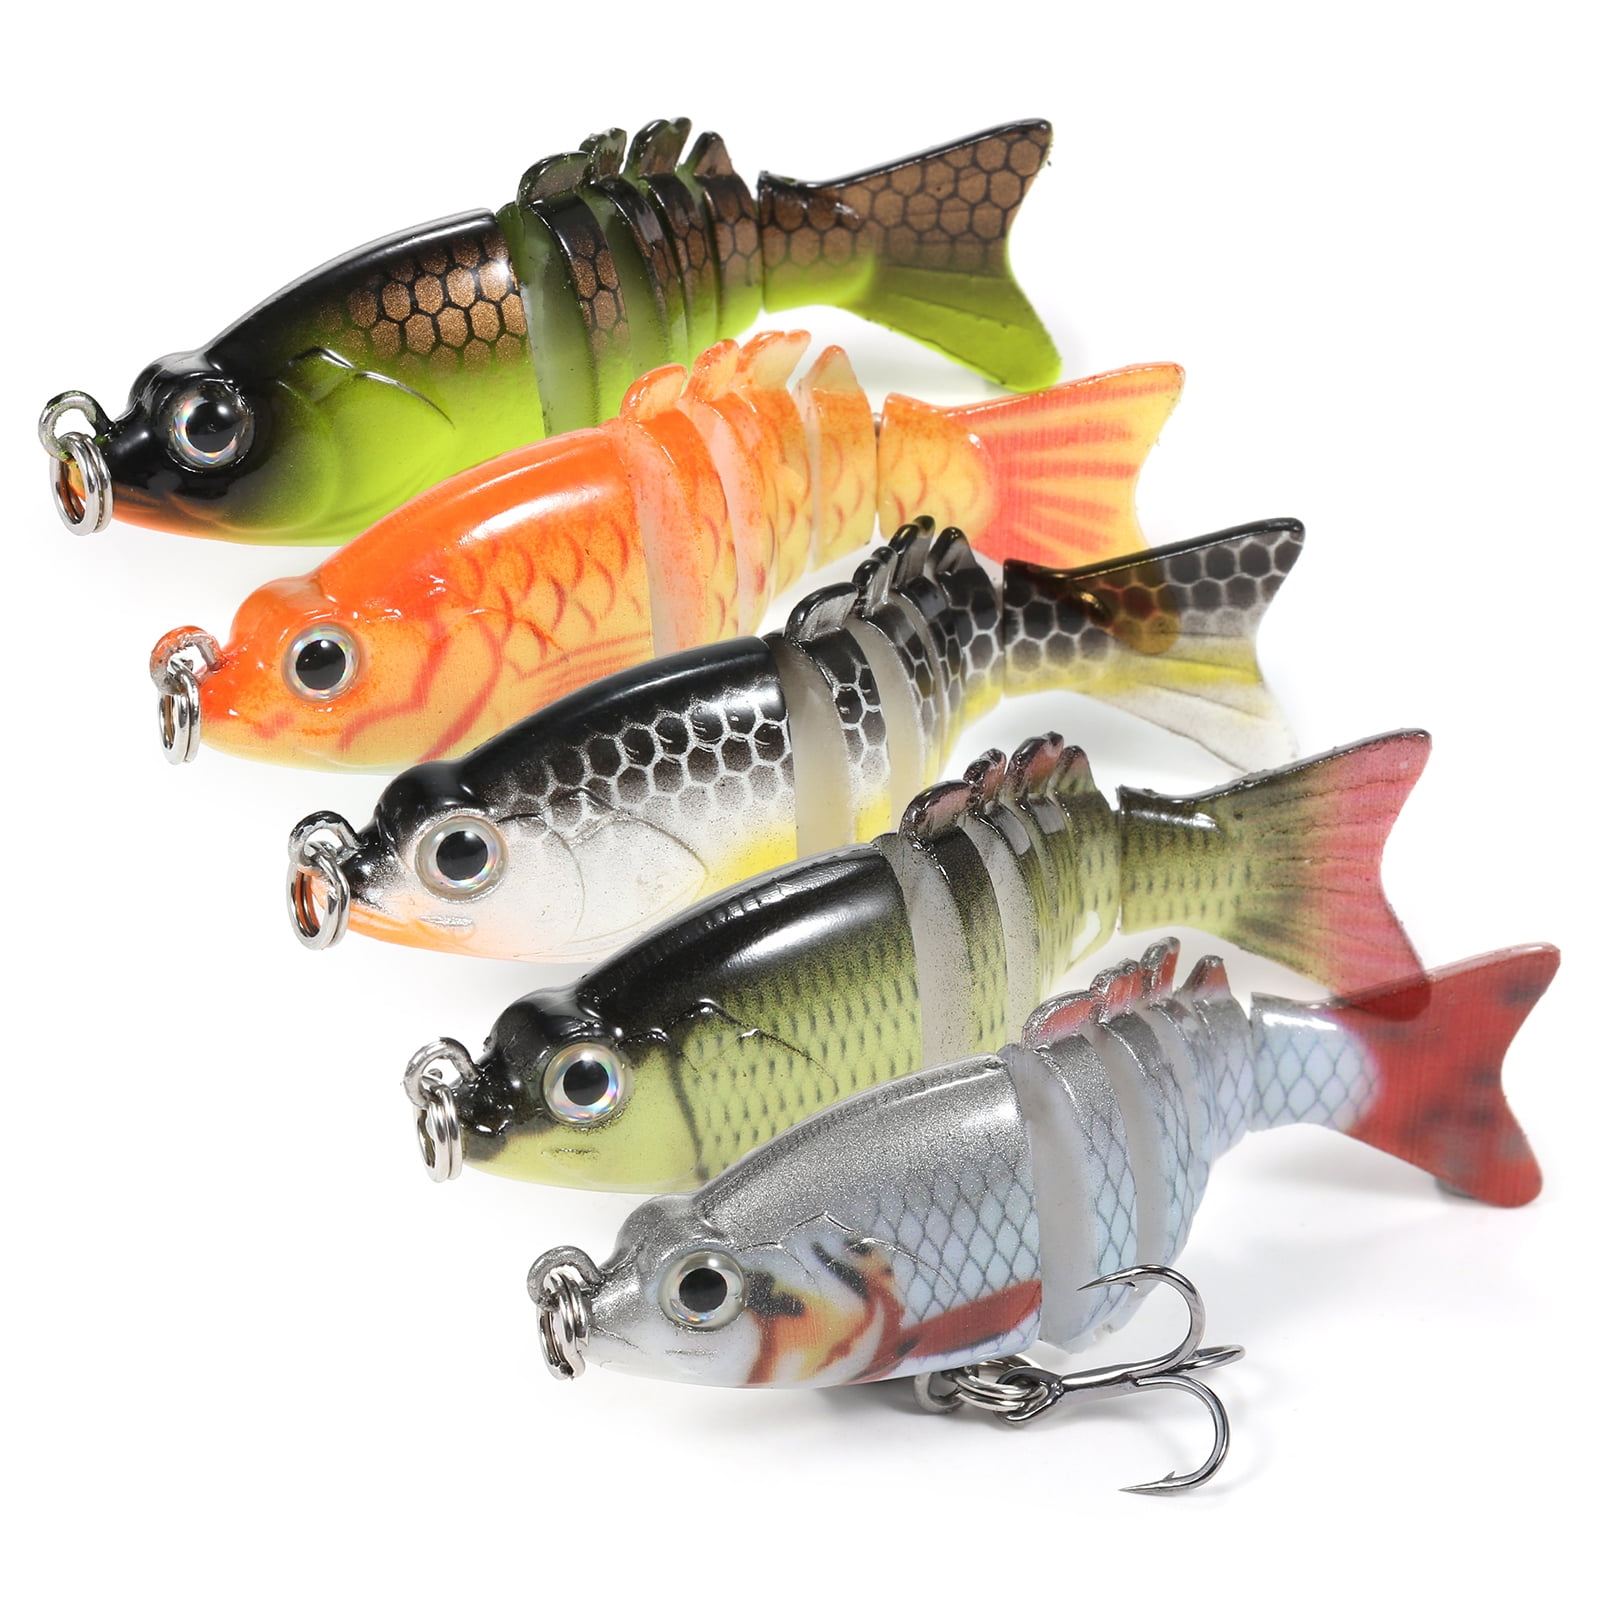 Ycolew Fishing Lures, Jointed Swimbaits for Bass Fishing,Crankbaits VIB  Minnow Lures Hard Bait, Pencil Popper Topwater Fishing Lures with Propeller  Tail Freshwater Saltwater,Bass Lures 